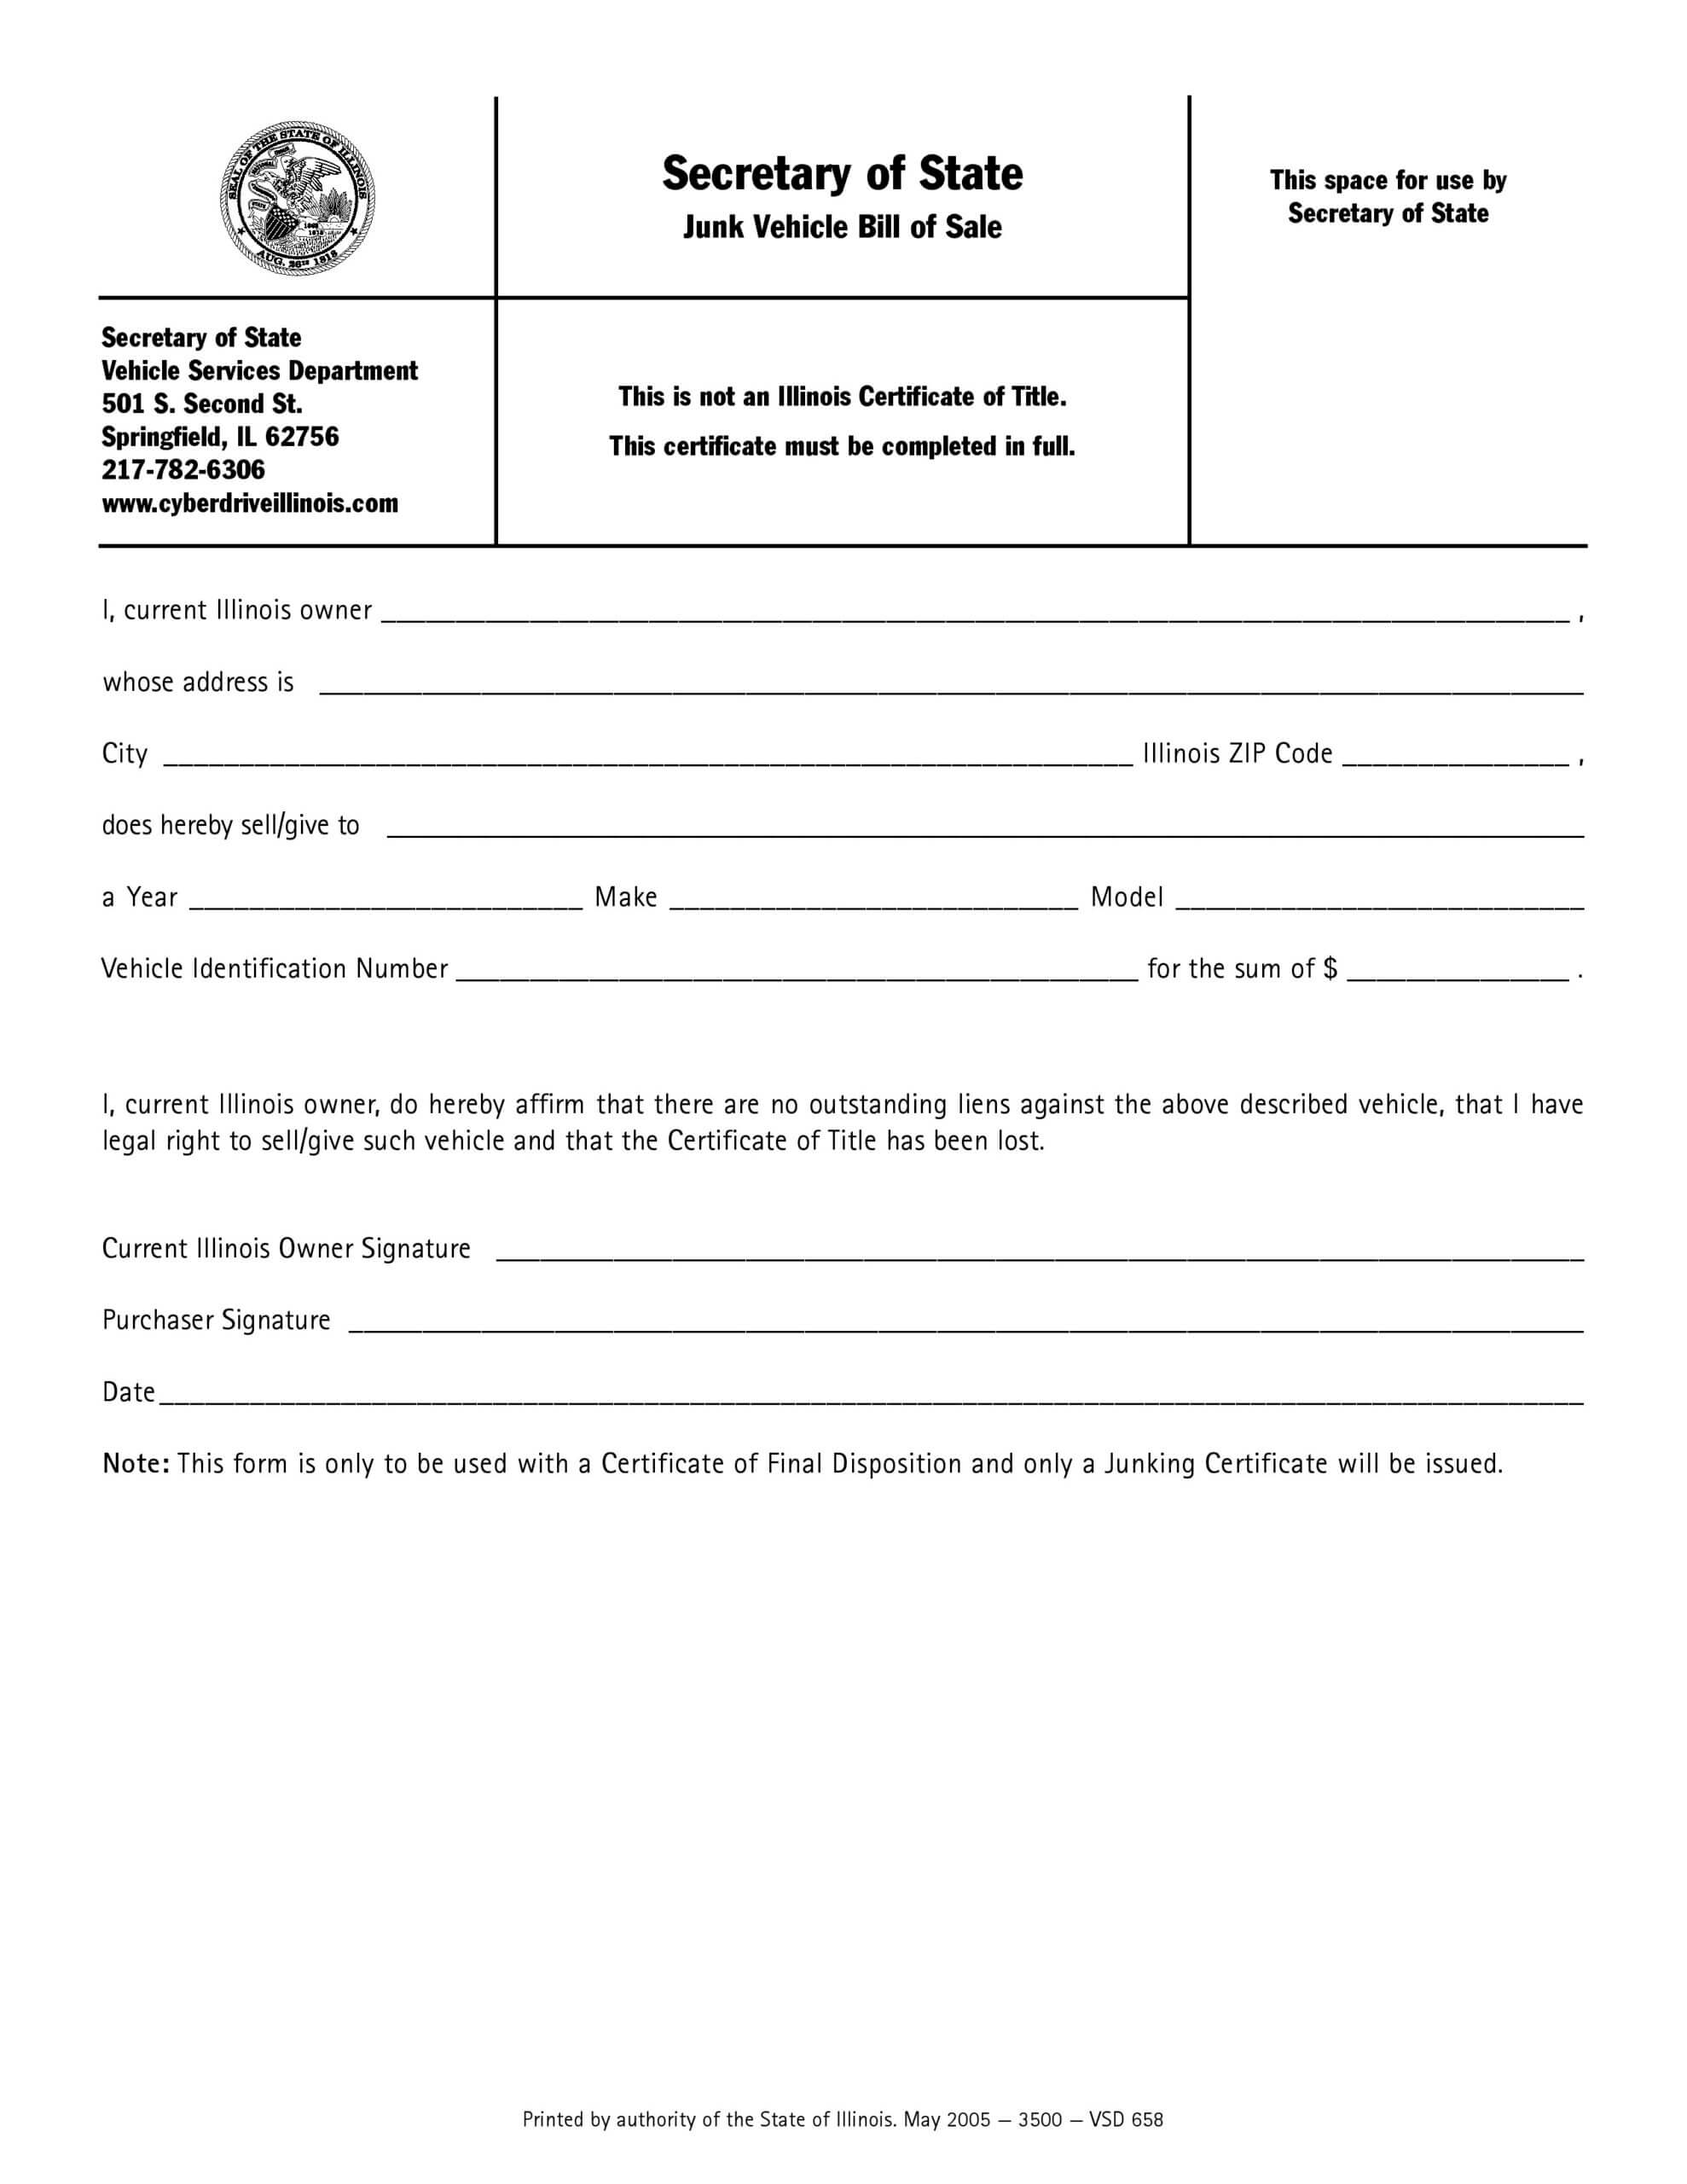 Free Illinois Junk Vehicle Bill Of Sale Form | Pdf | Word With Regard To Certificate Of Disposal Template